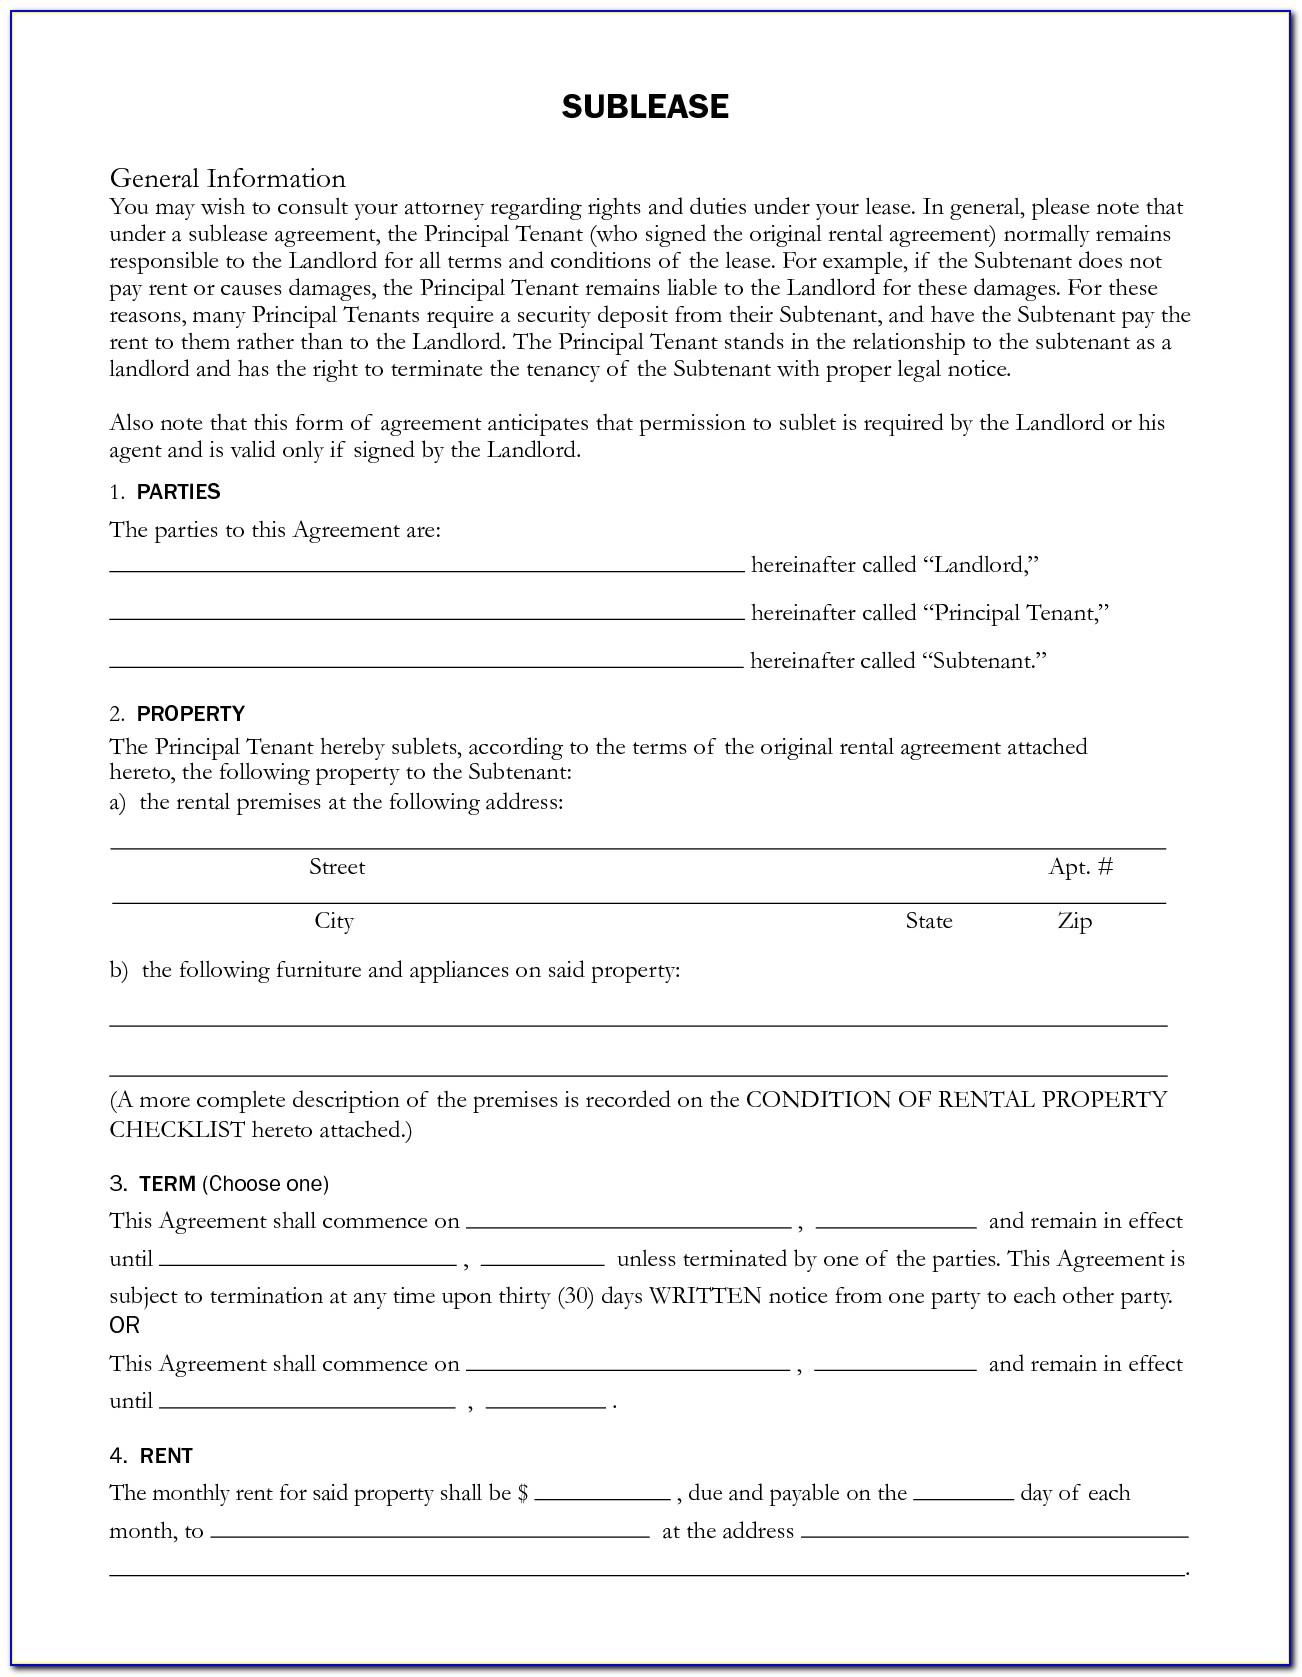 Sublease Rental Agreement Forms Free